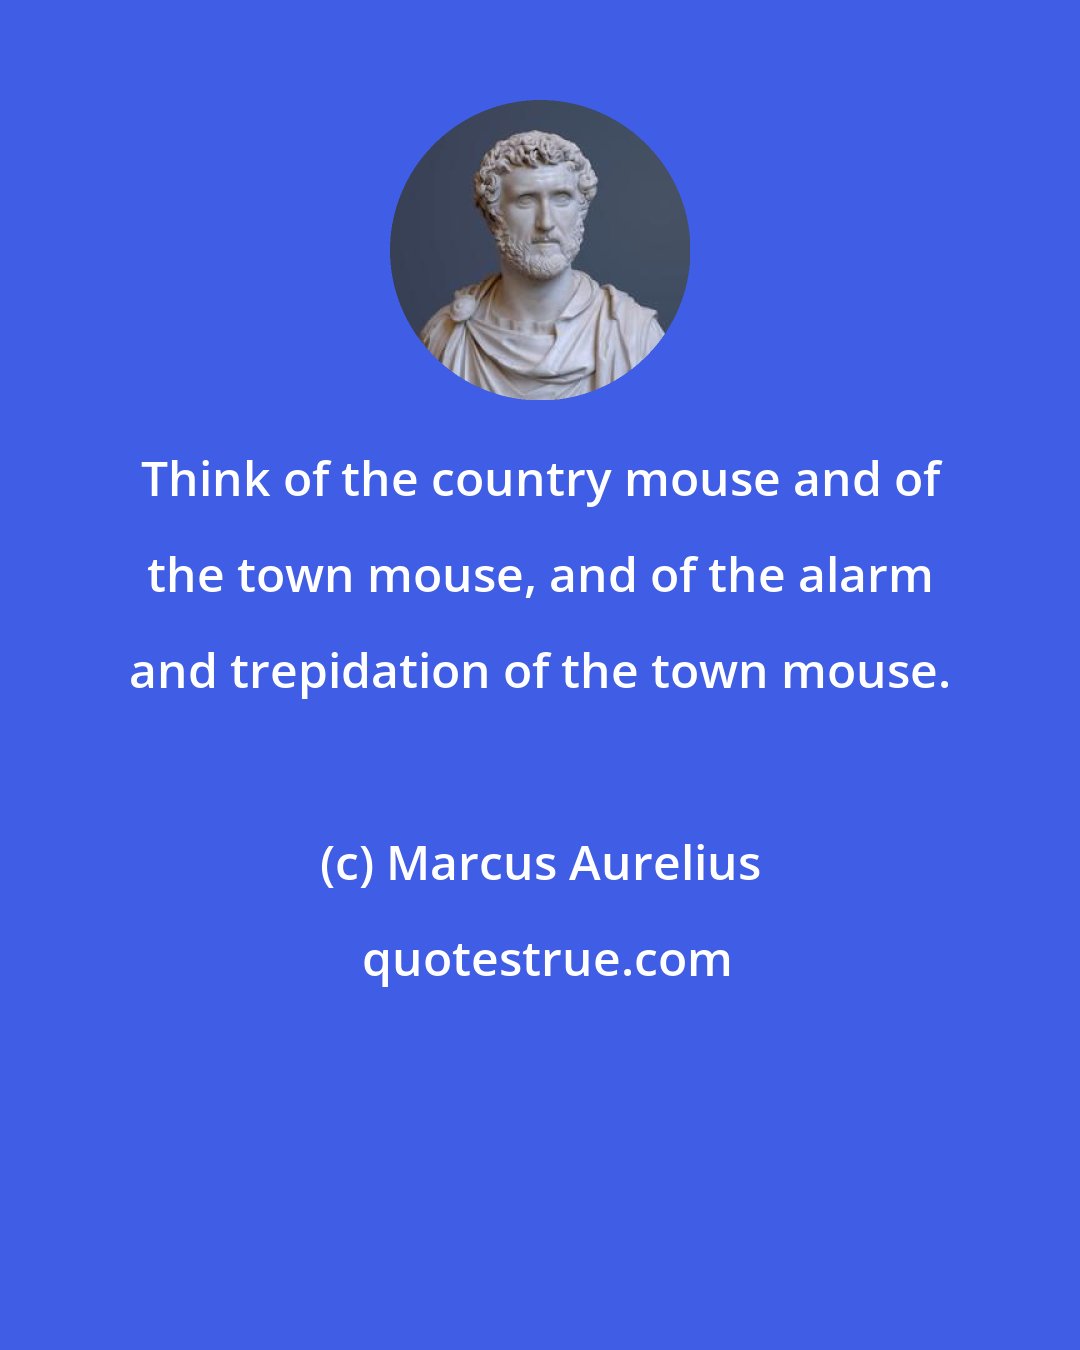 Marcus Aurelius: Think of the country mouse and of the town mouse, and of the alarm and trepidation of the town mouse.